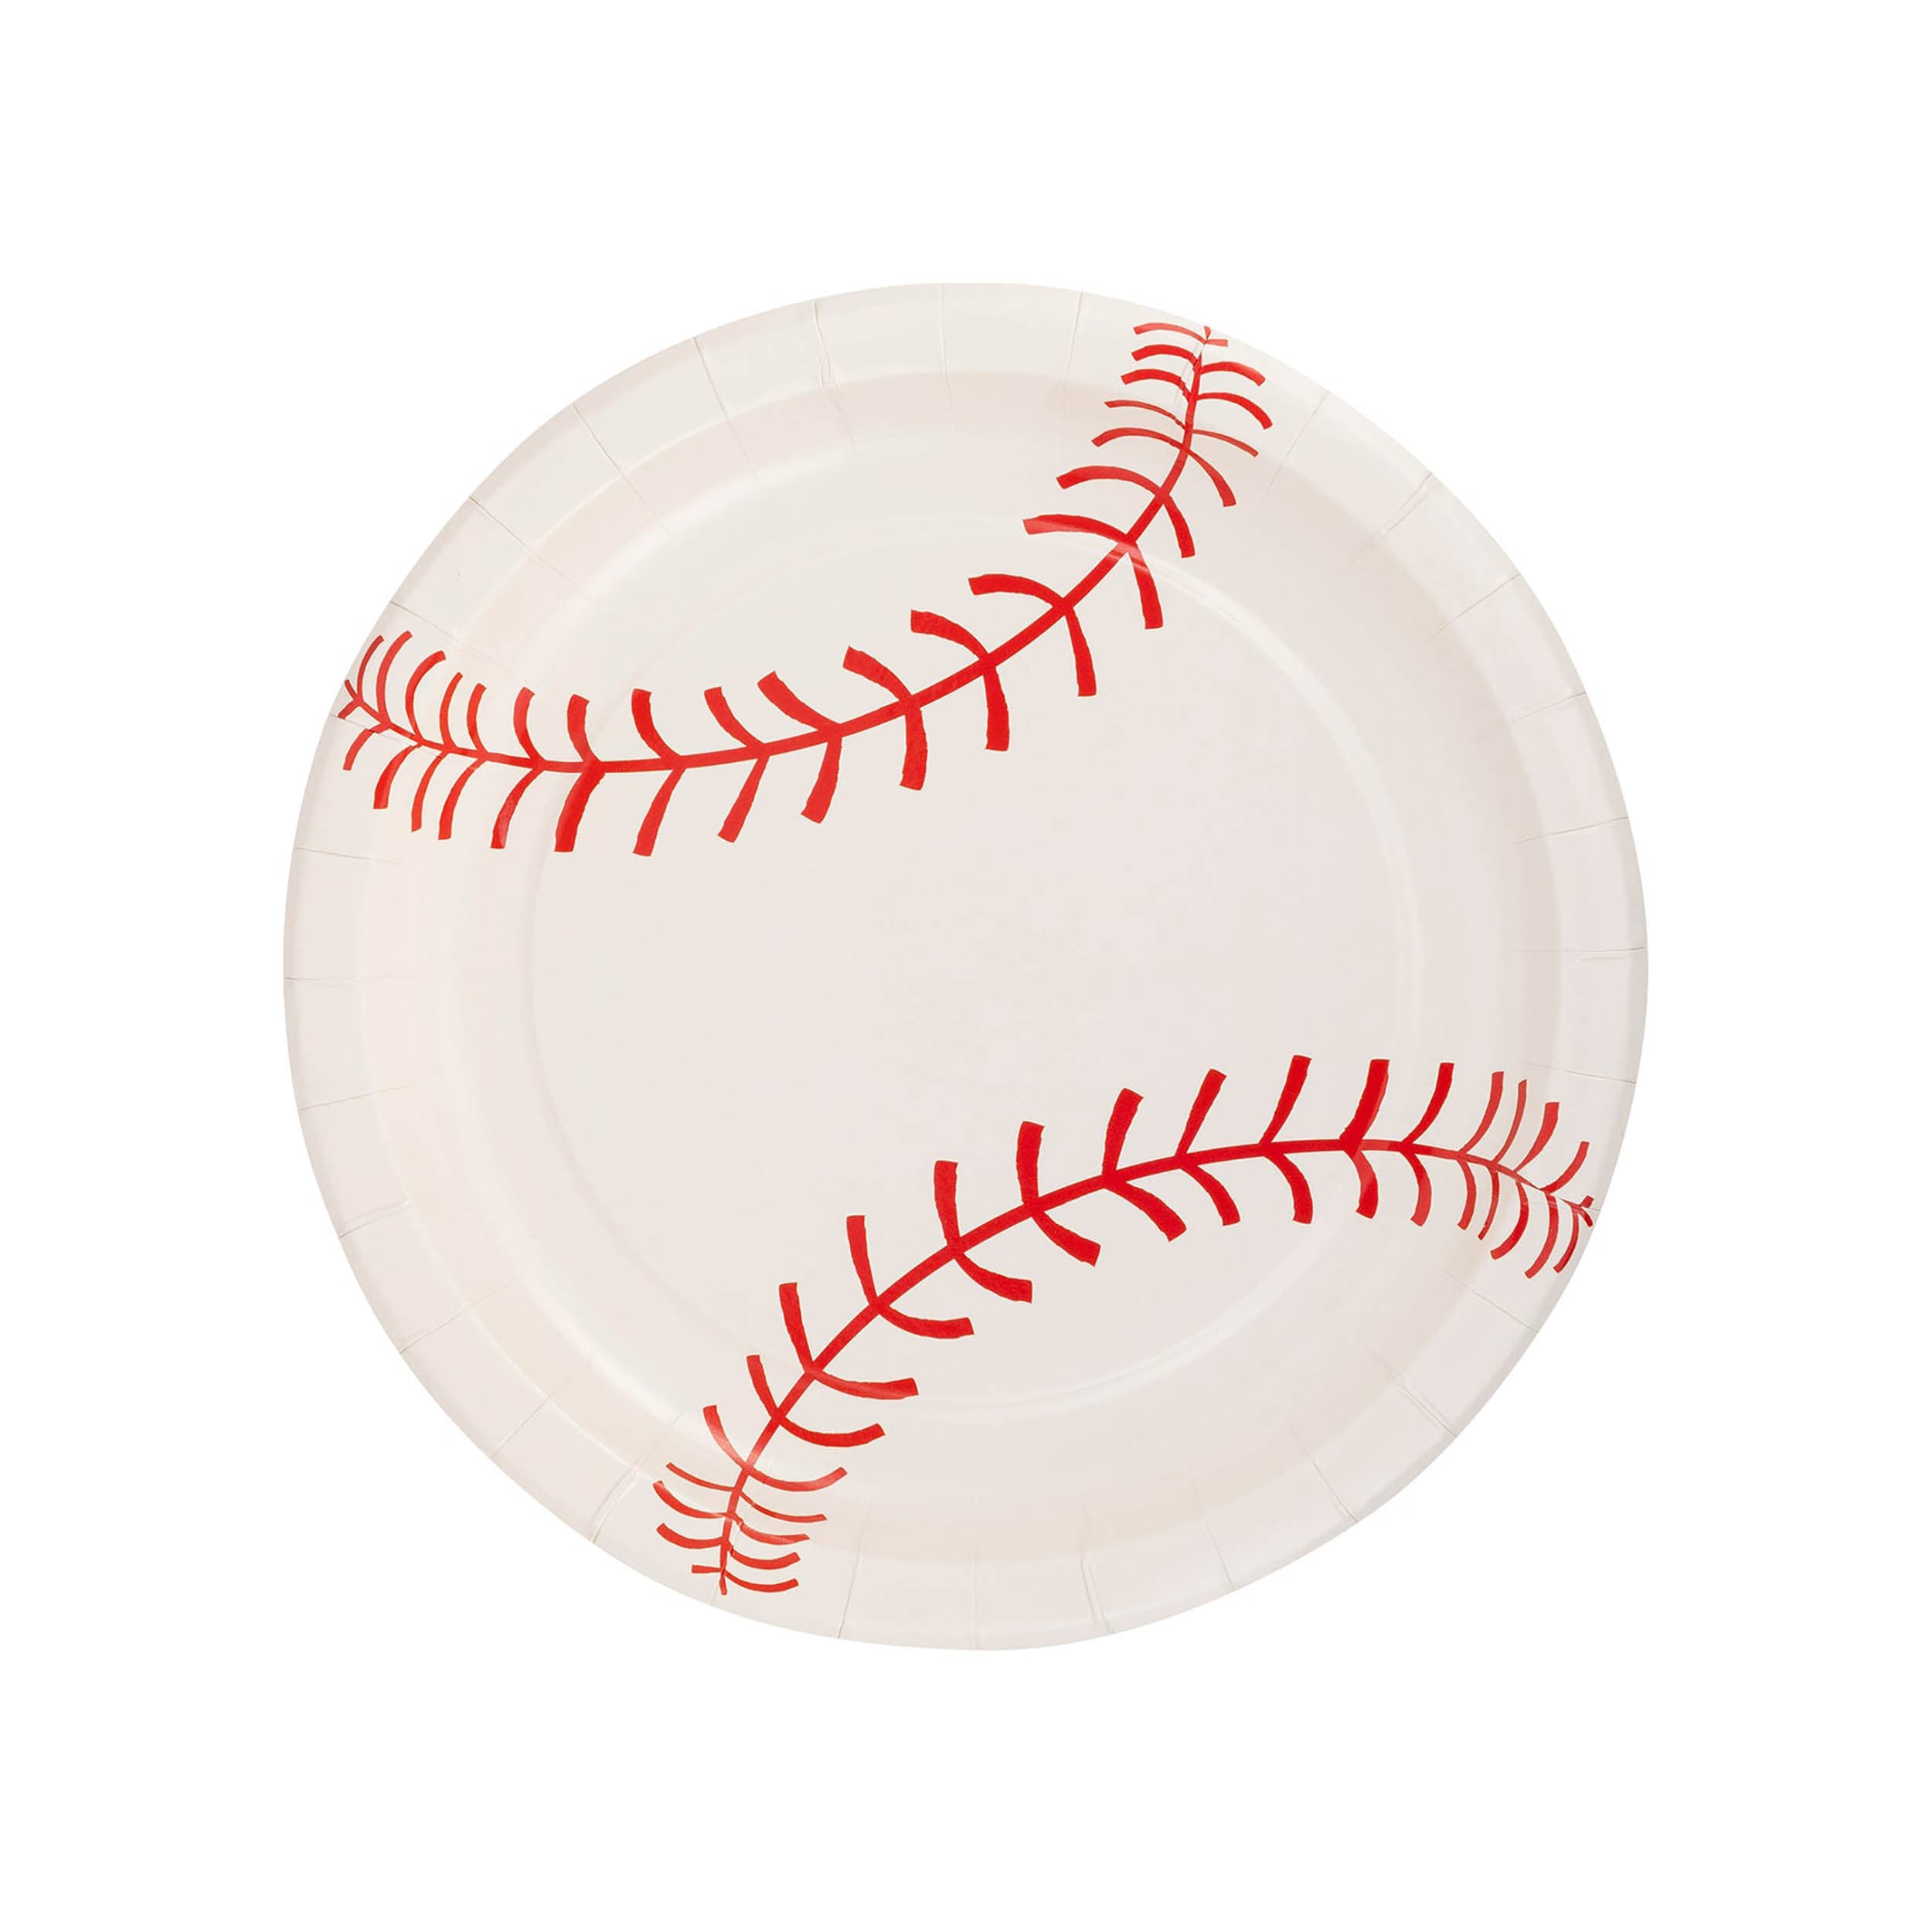 Baseball Party Paper Plates - Round Plate that looks like a baseball with red stitching